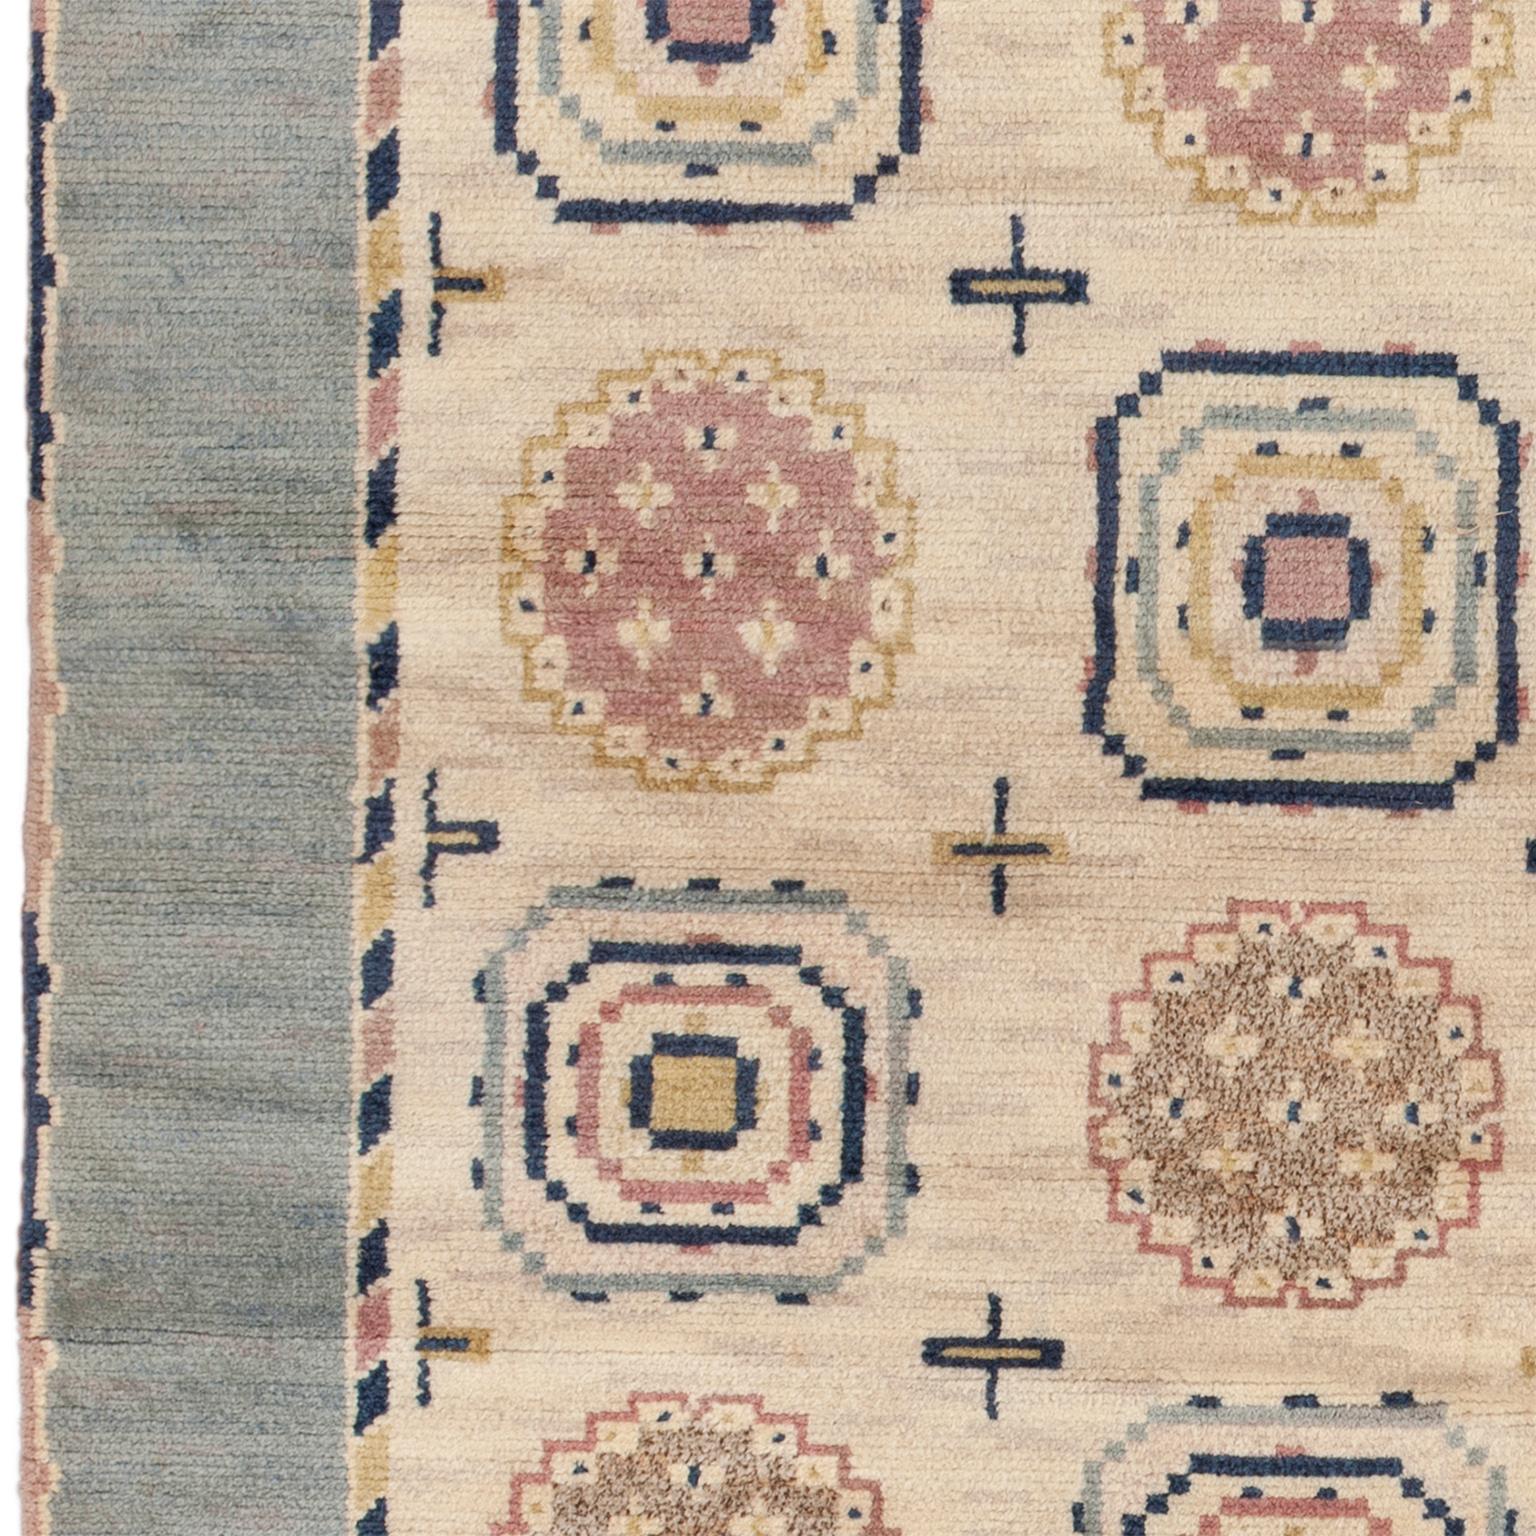 Hand-Woven Mid-20th Century Swedish Pile Rug by AB MMF